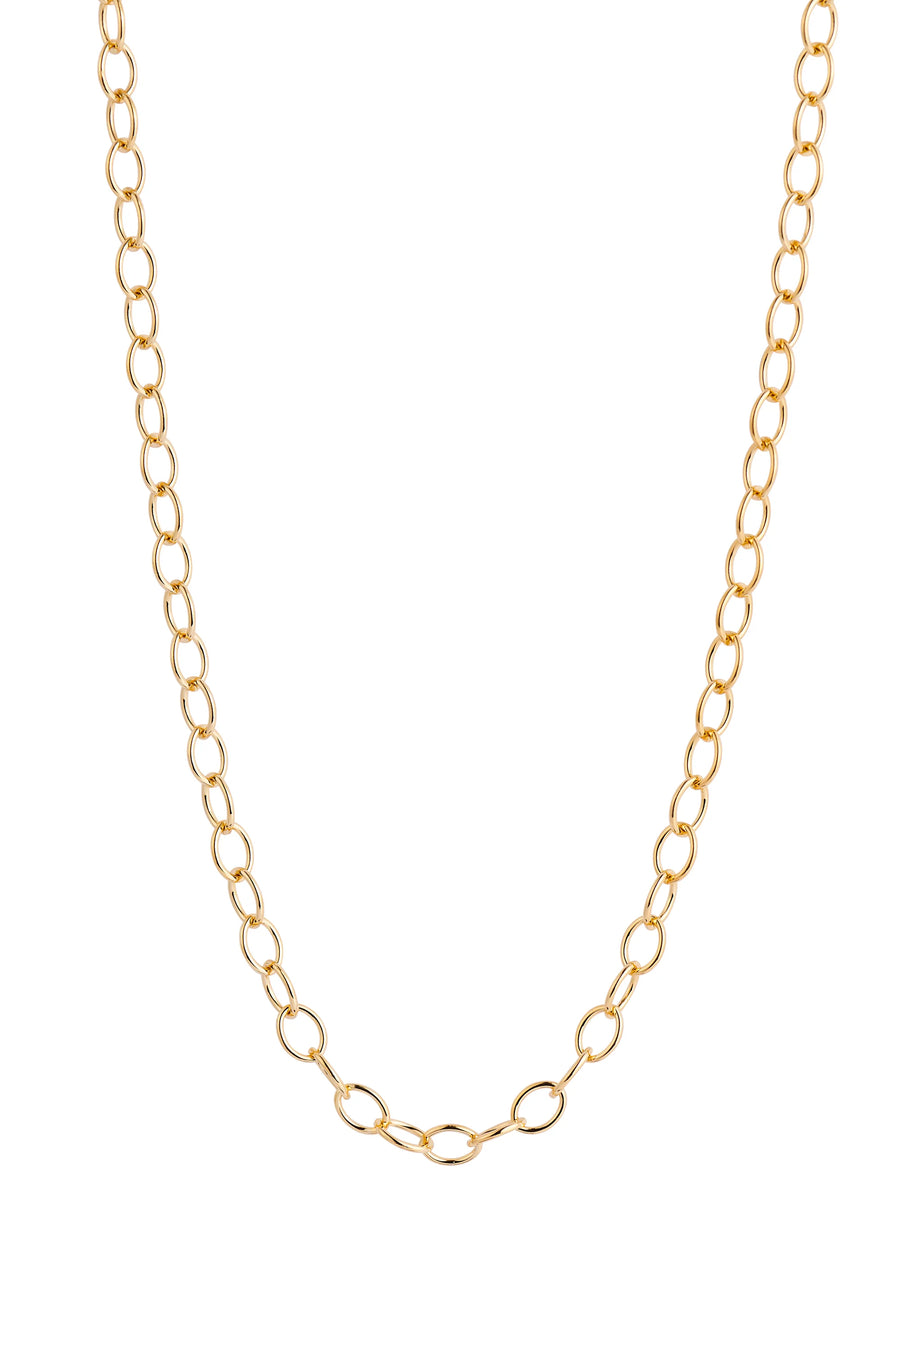 LISBETH JEWELRY - MARIE NECKLACE - GOLD FILL